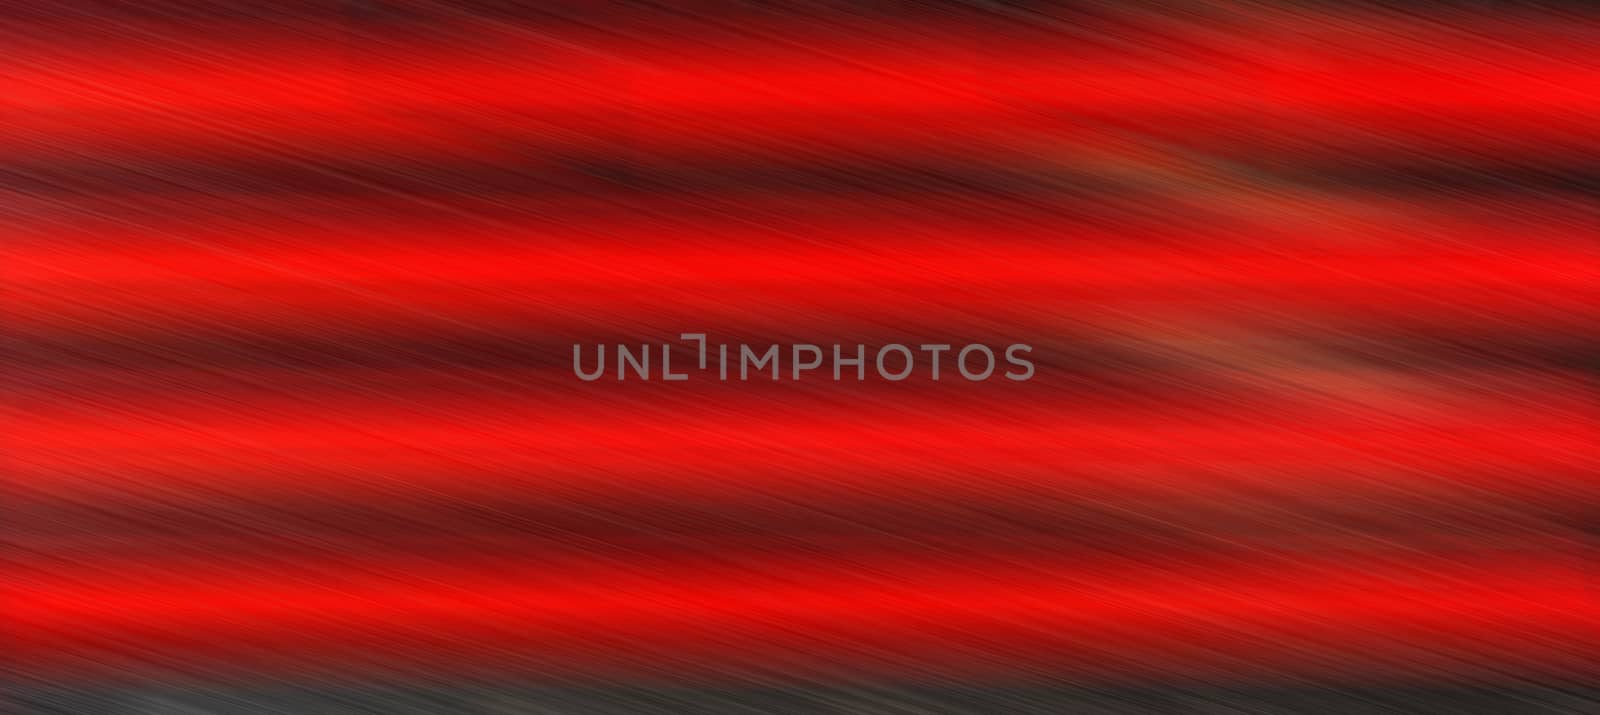 Abstract background or texture design